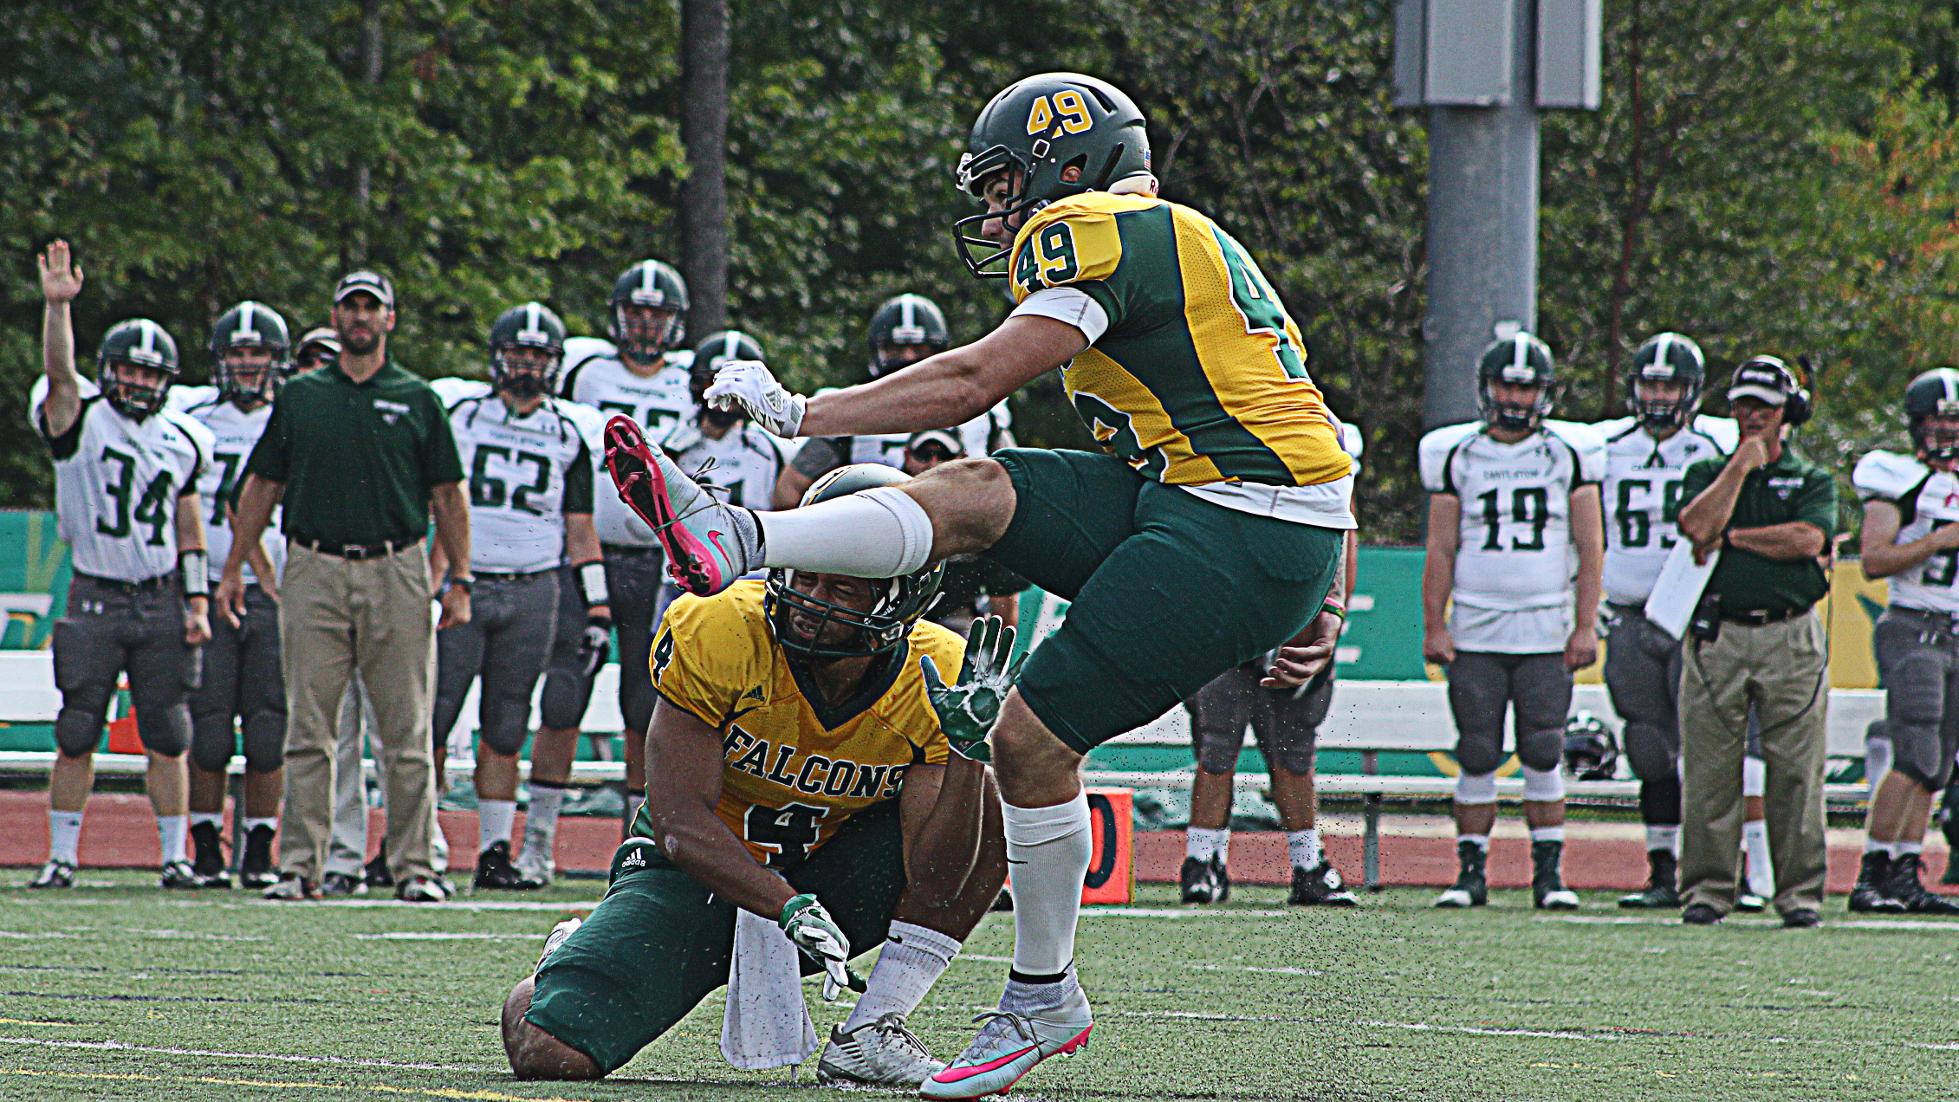 Ludwig Selected MASCAC Special Teams Player of the Week